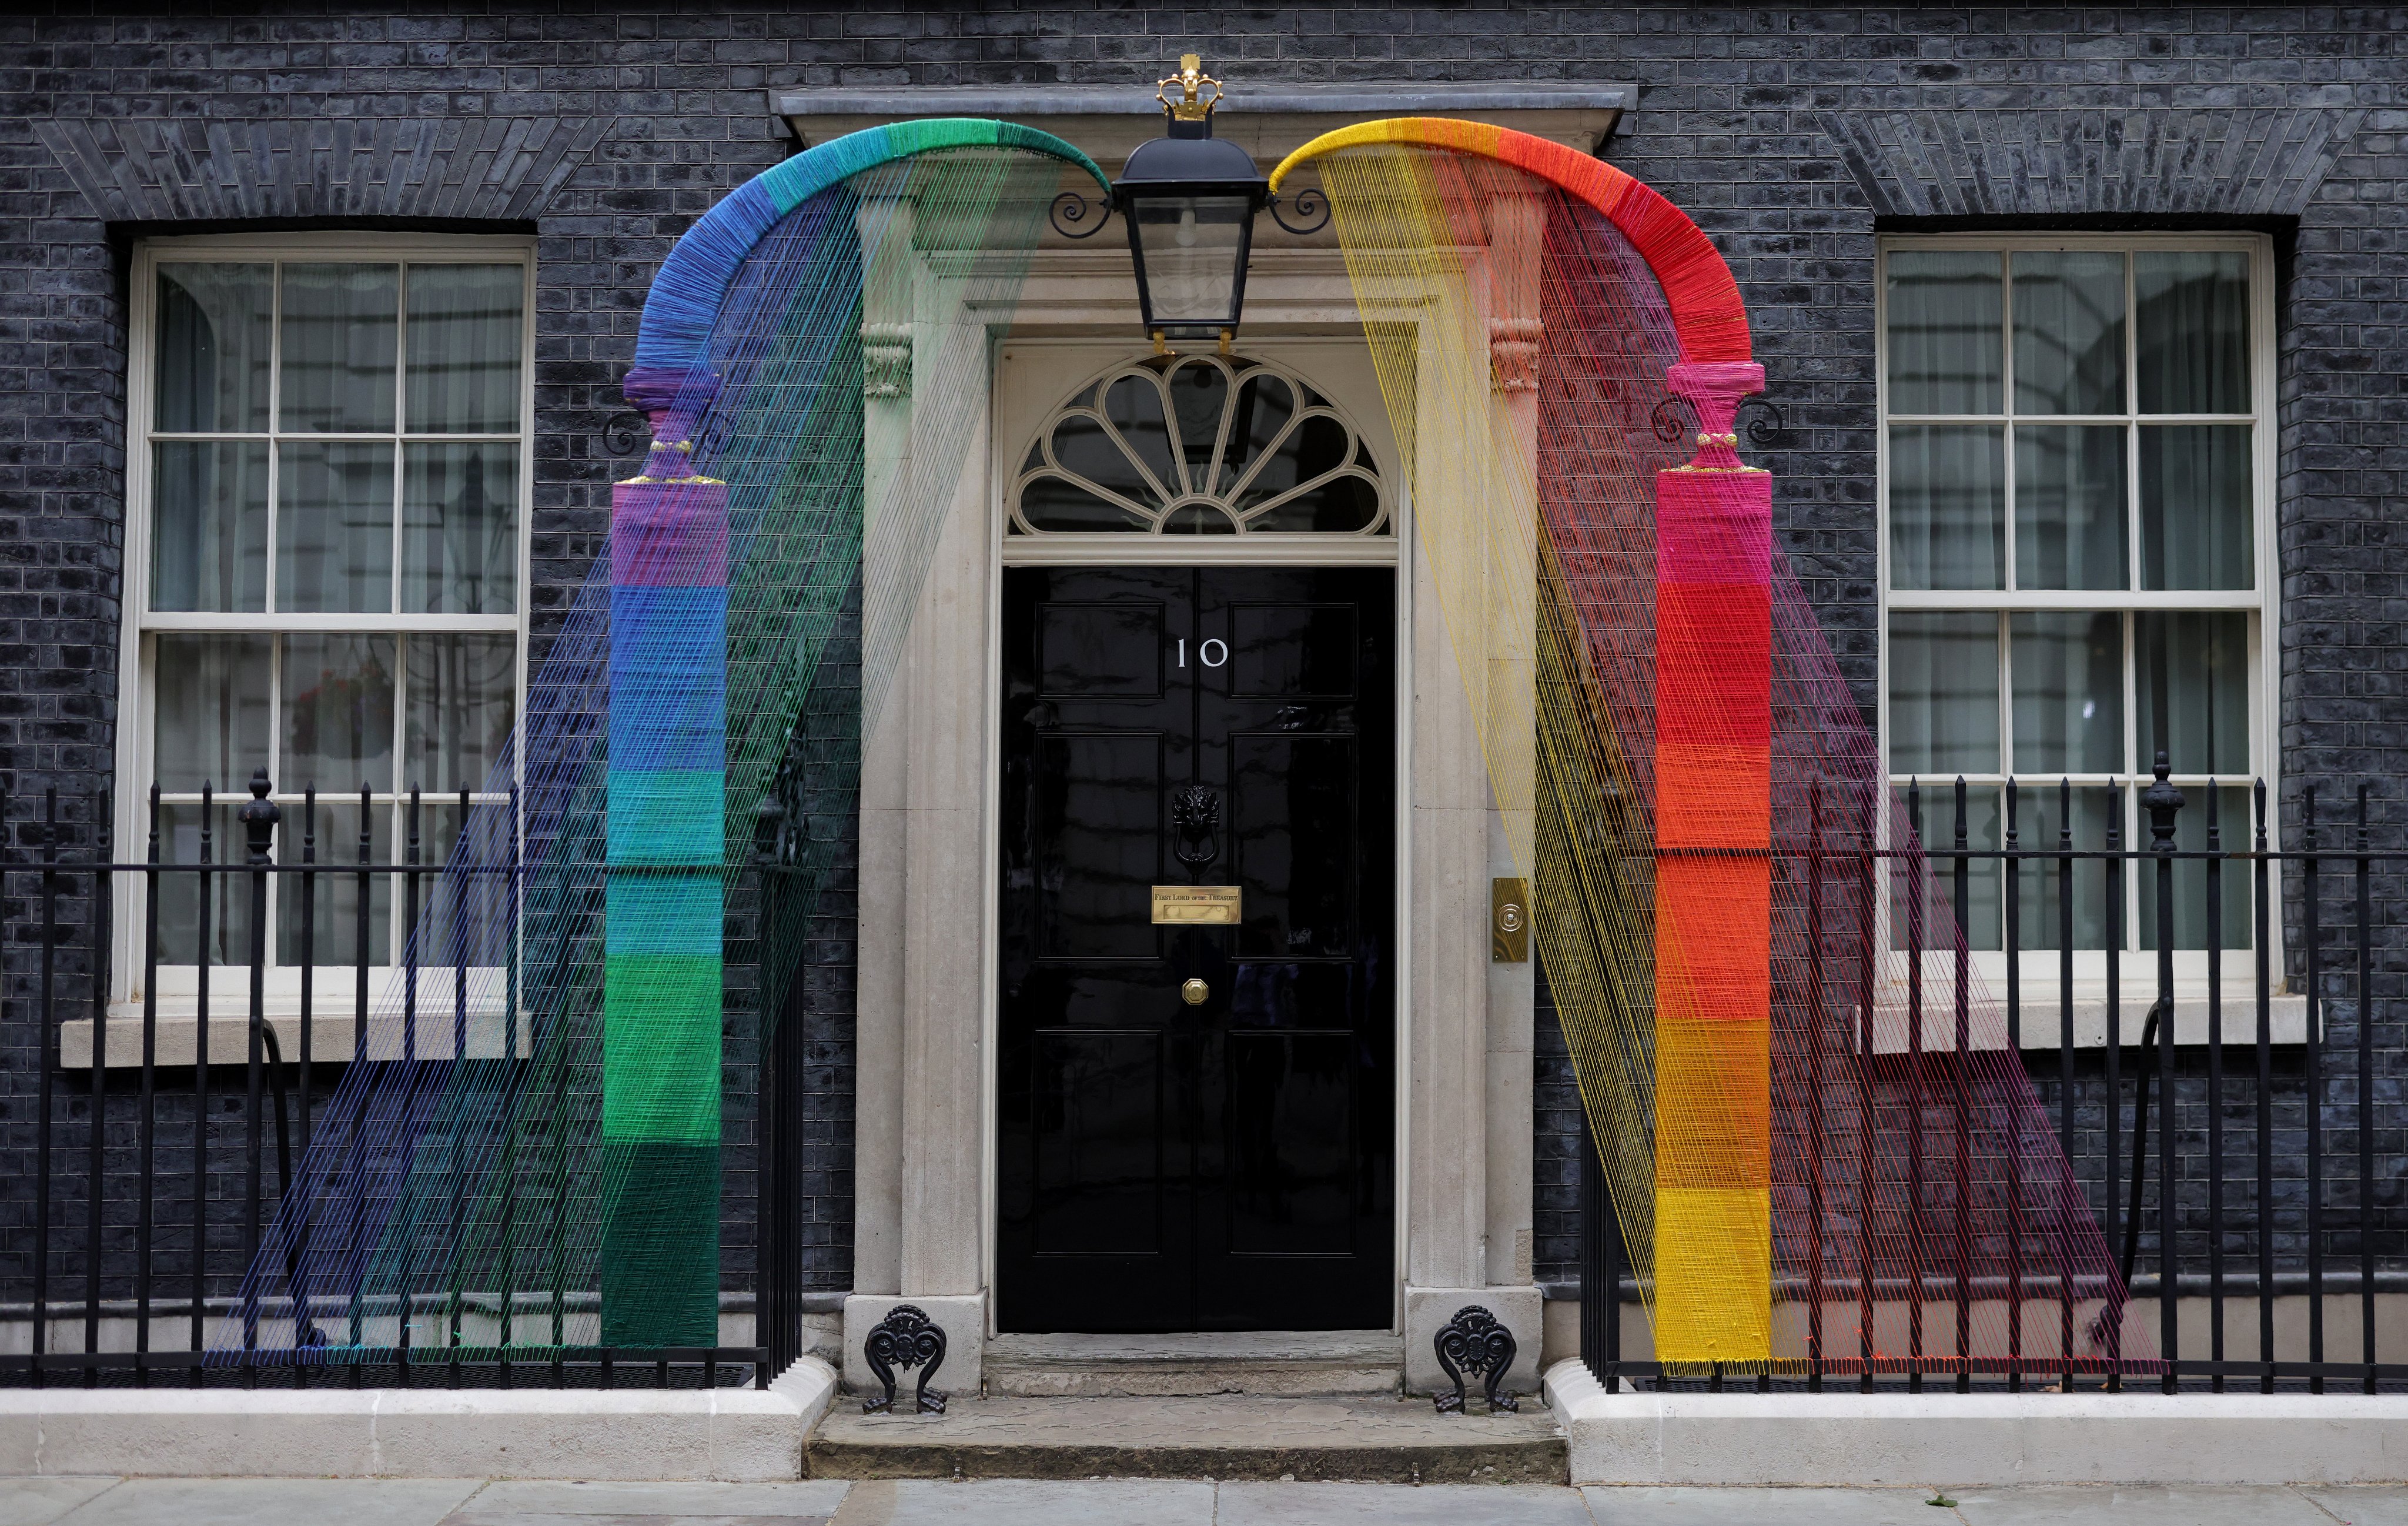 Uk Prime Minister Today The Prime Minister Will Welcome Guests To Downing Street To Celebrate The Extraordinary Contribution Of Lgbt People To Our Country As Pridemonth Draws To A Close